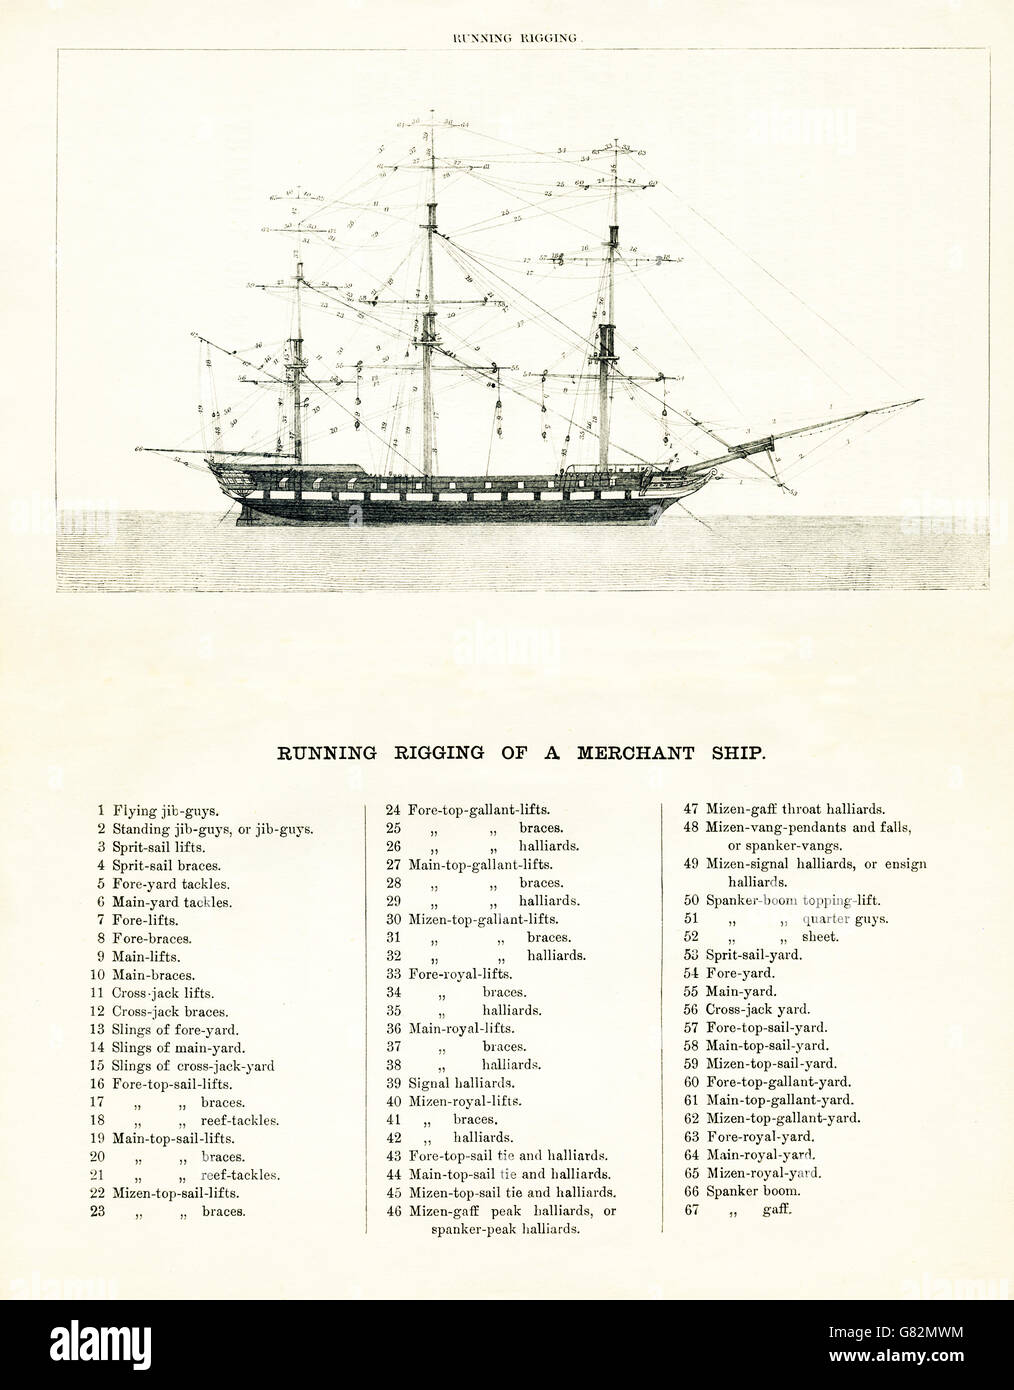 This illustration that dates to the 1800s shows a merchant ship. The rigging is all labeled, and the rigging is running rigging for this type of vessel. Stock Photo